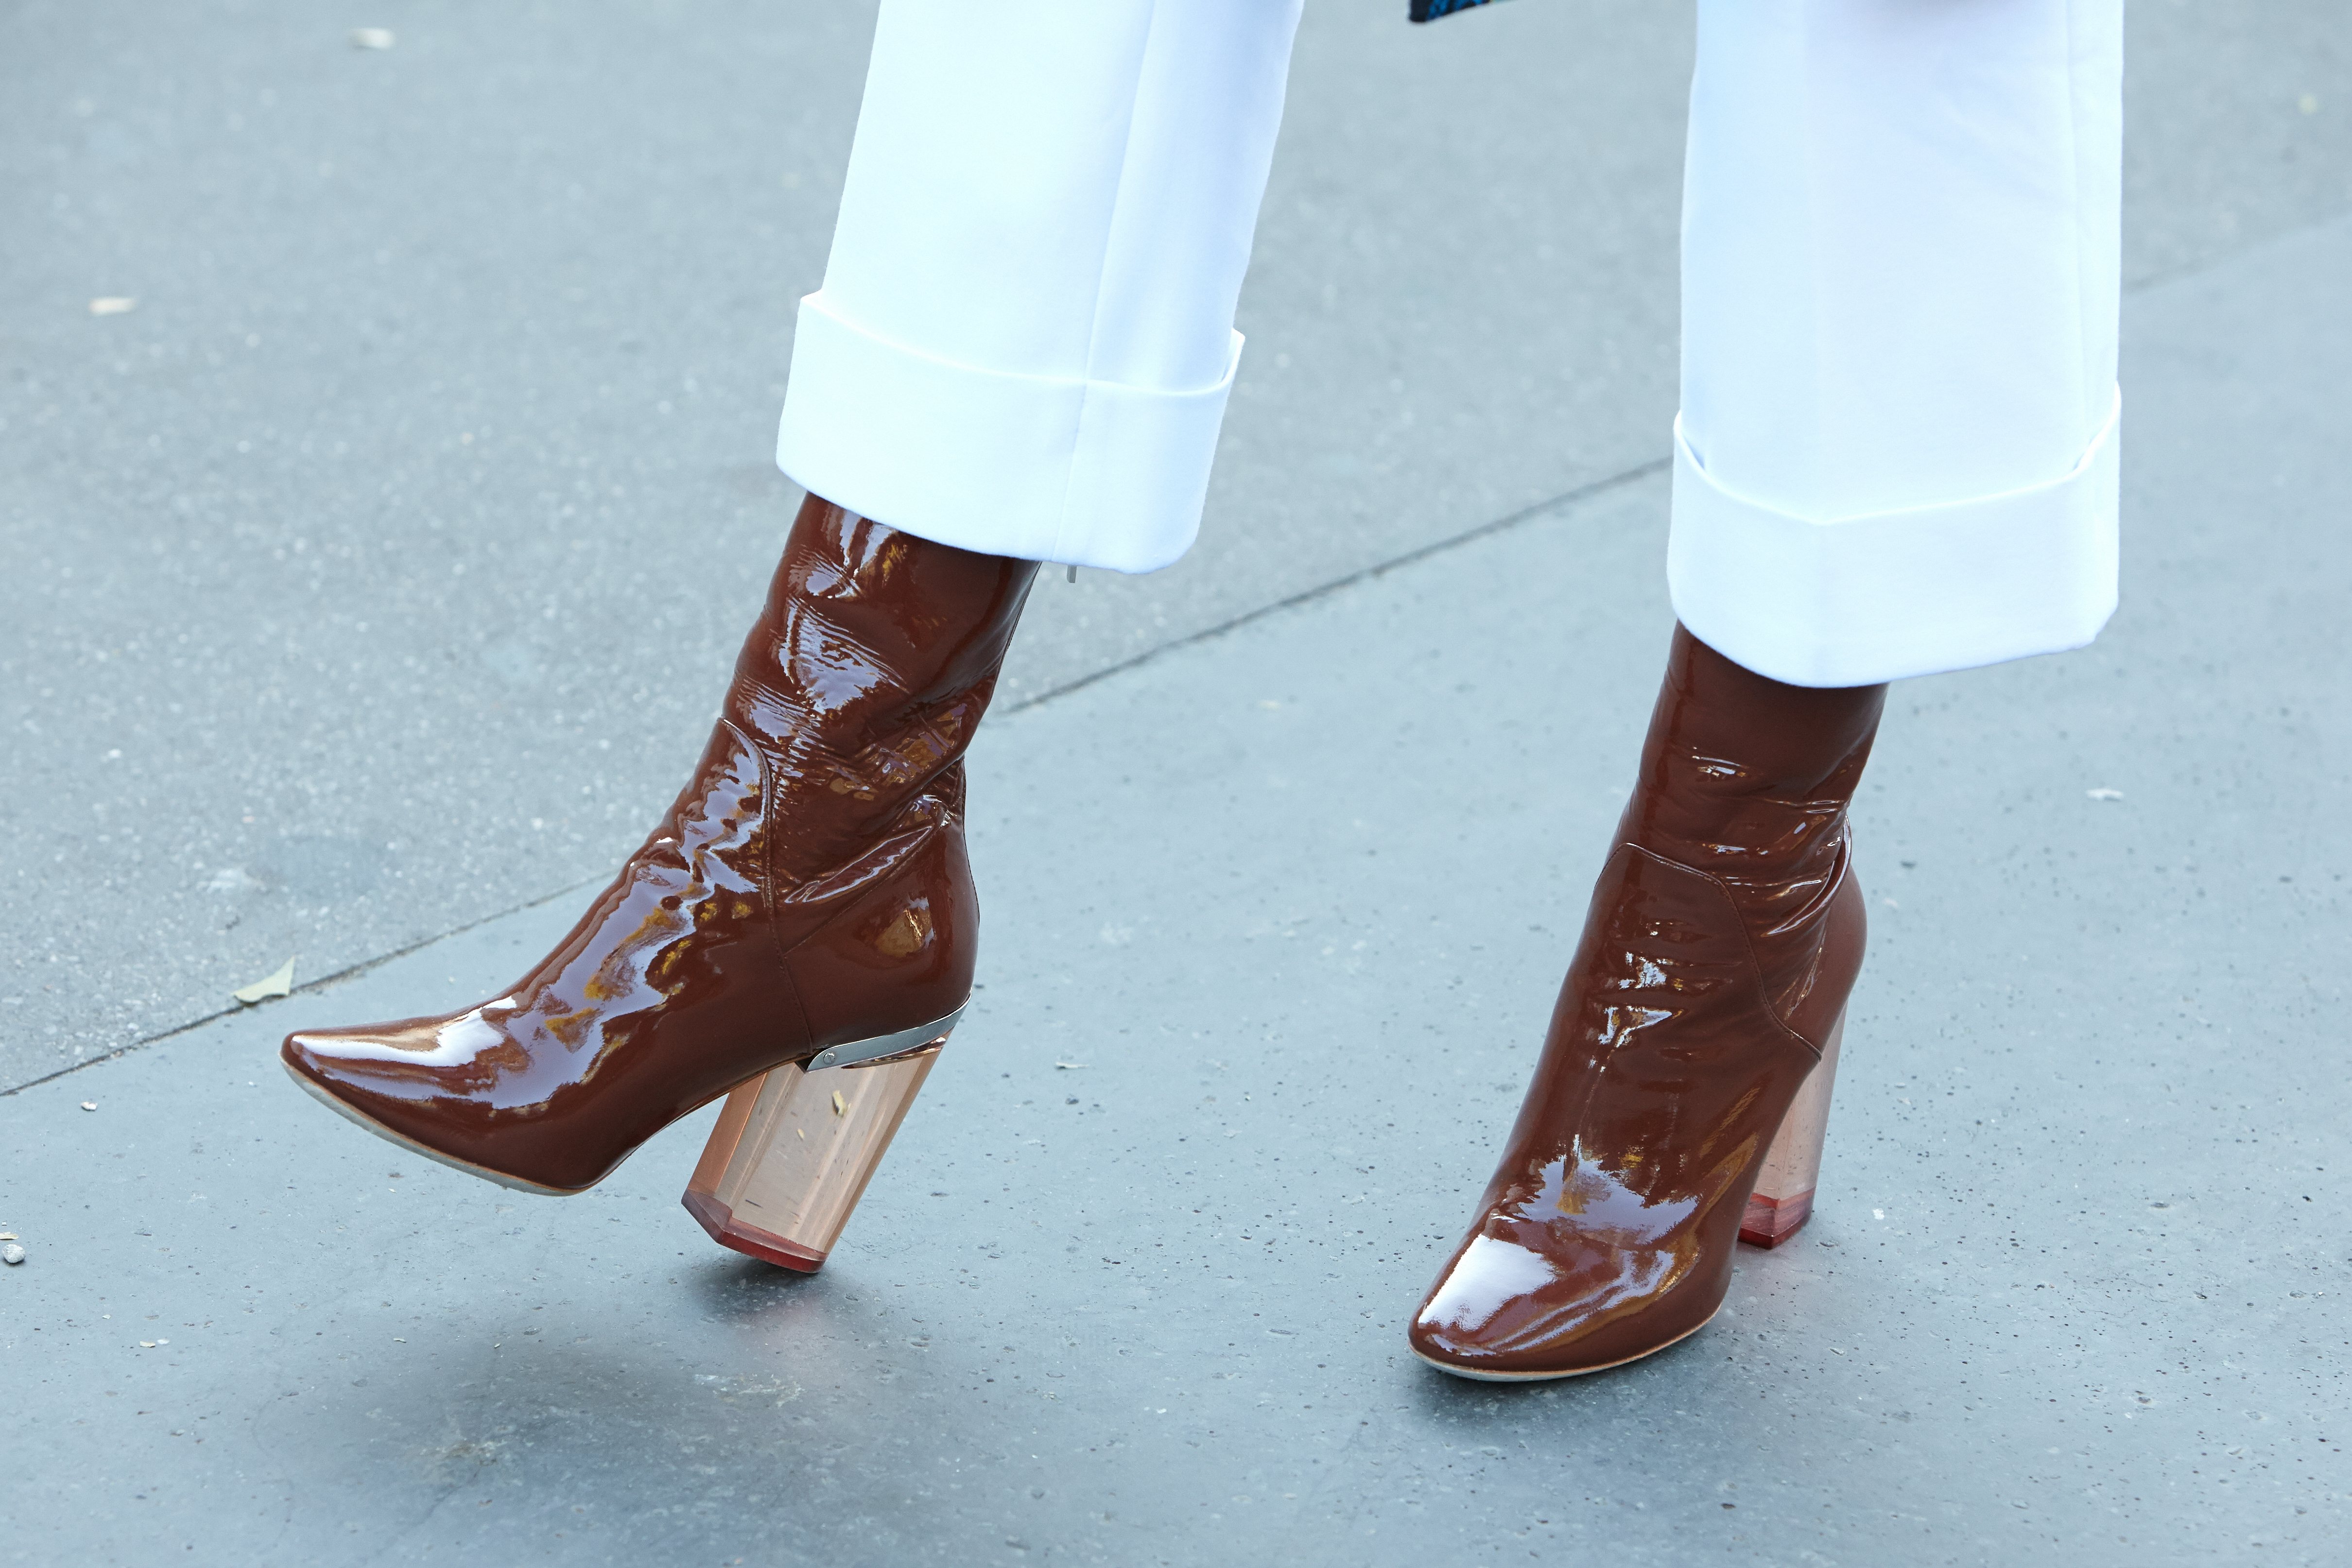 5 Stores That Sell Wide Calf Boots Tips 